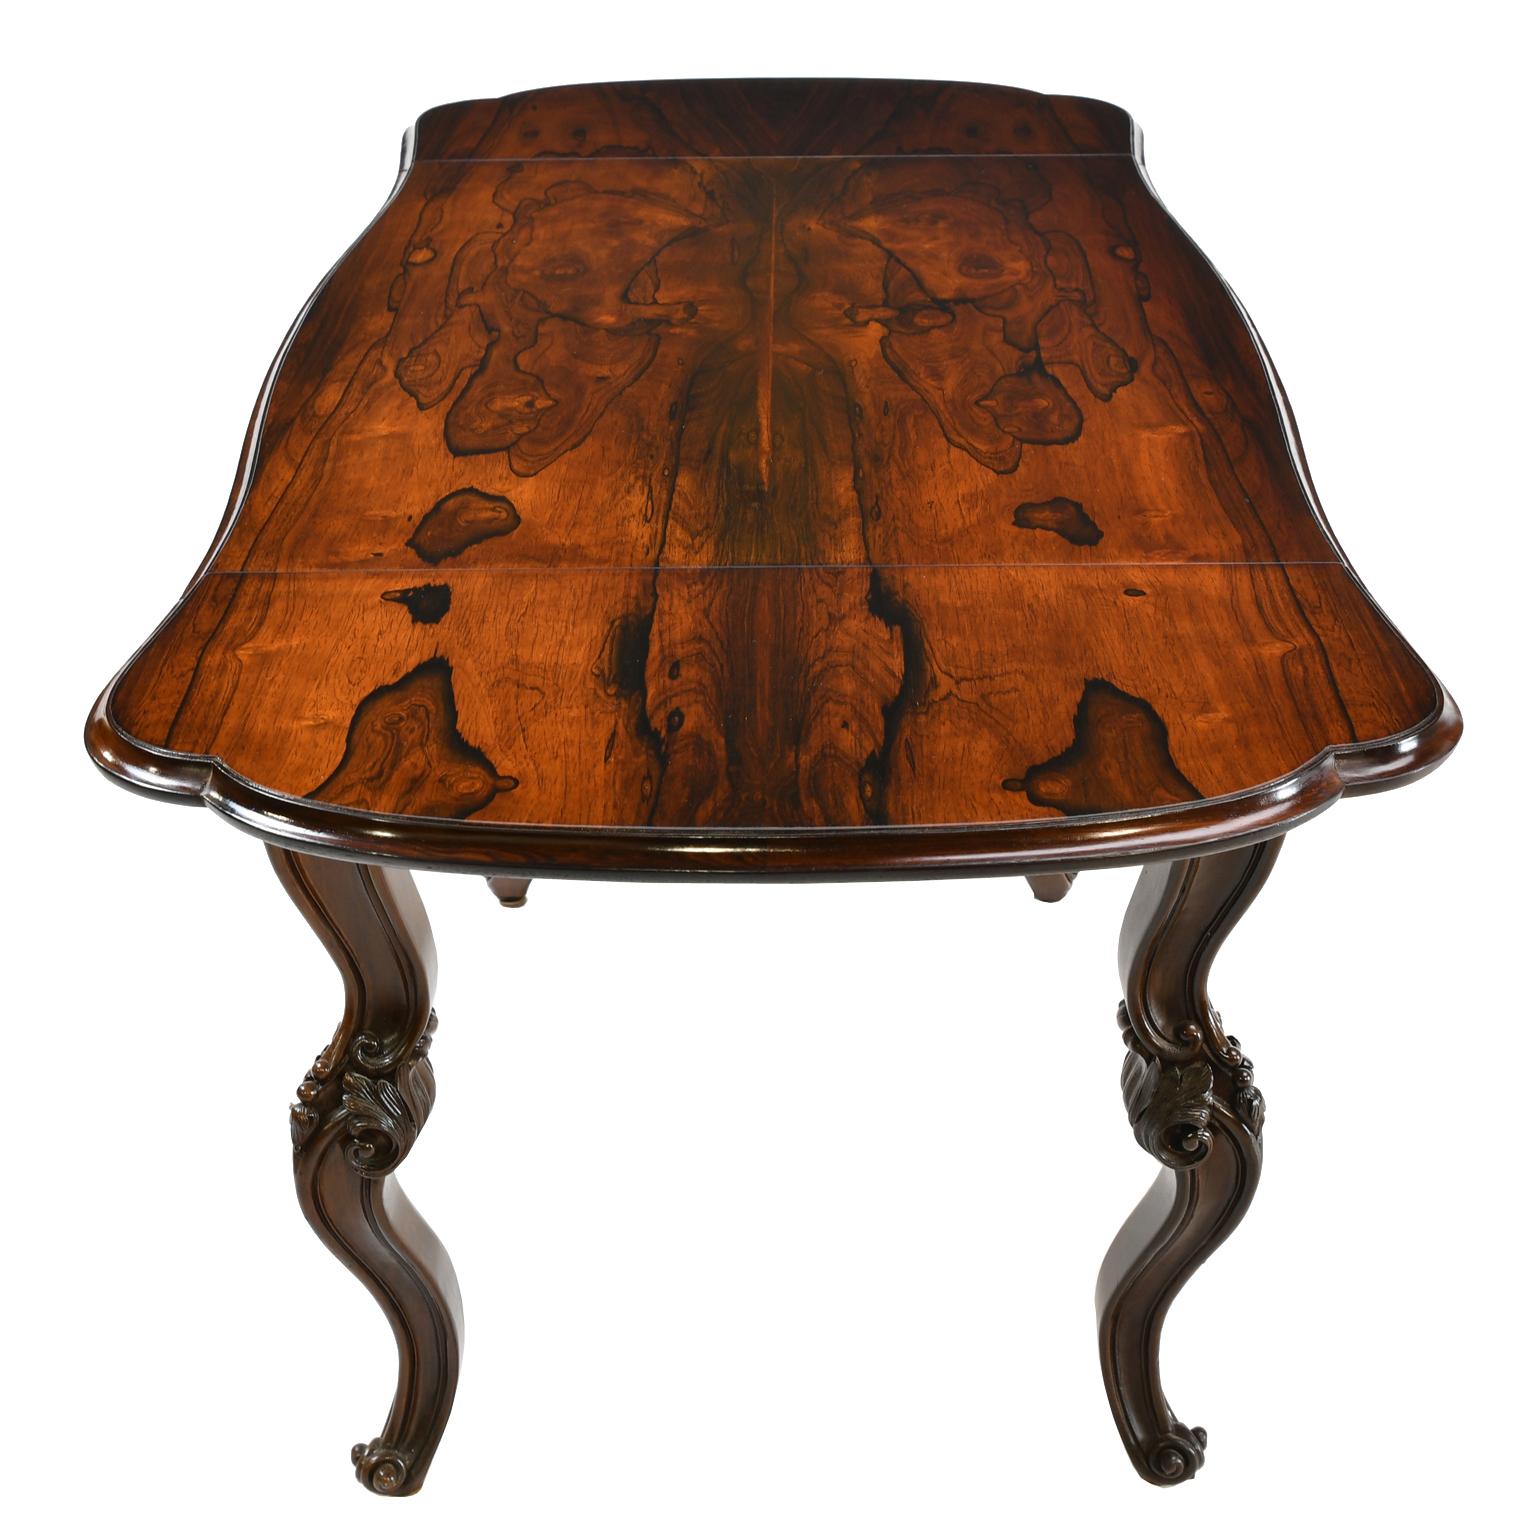 Rosewood American Rococo Revival Sofa Table or Writing Table NYC, circa 1840 For Sale 7